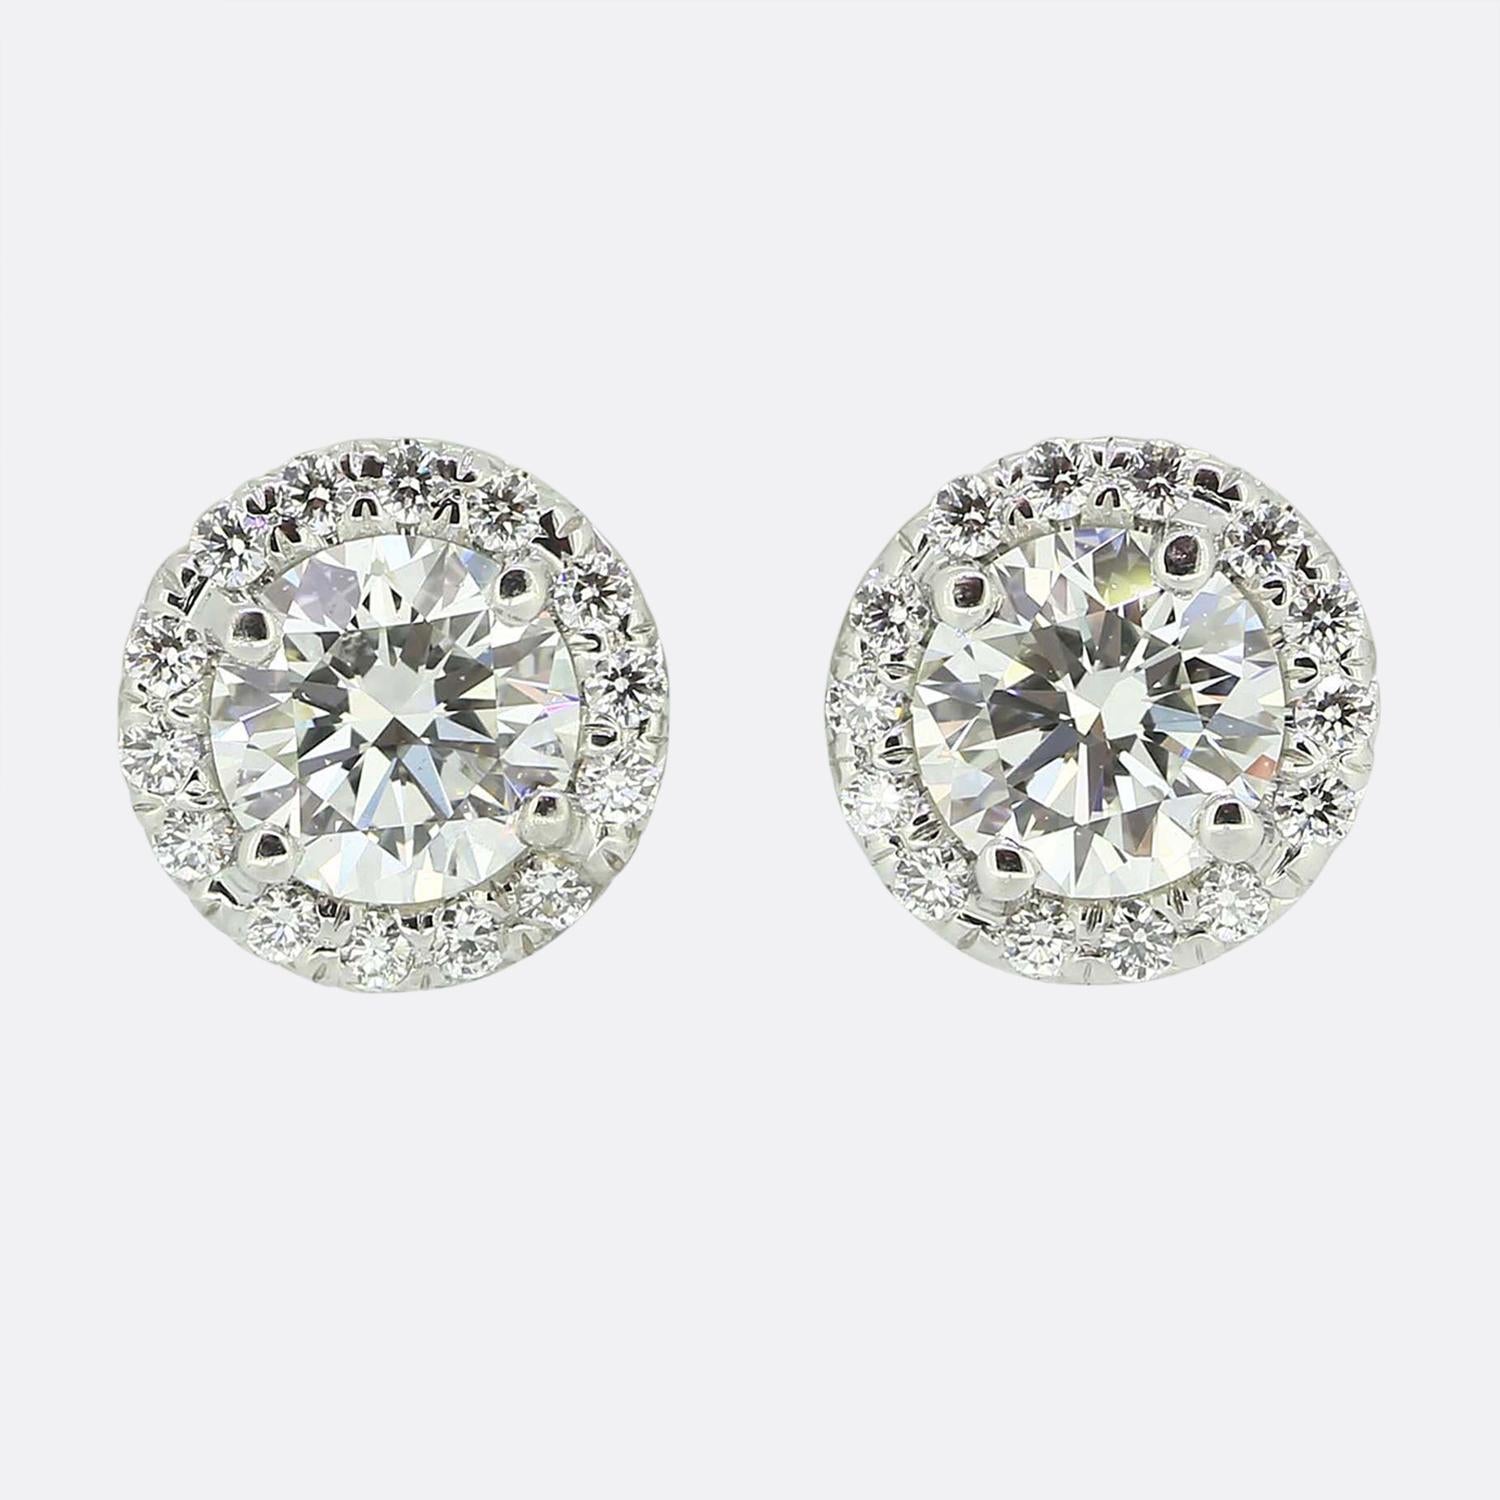 Here we have a fabulous diamond necklace and stud earrings set from the world renowned jewellery designer Tiffany & Co. Both pieces form part of the 'Soleste' collection and feature a single round brilliant cut diamond framed by a halo of matching